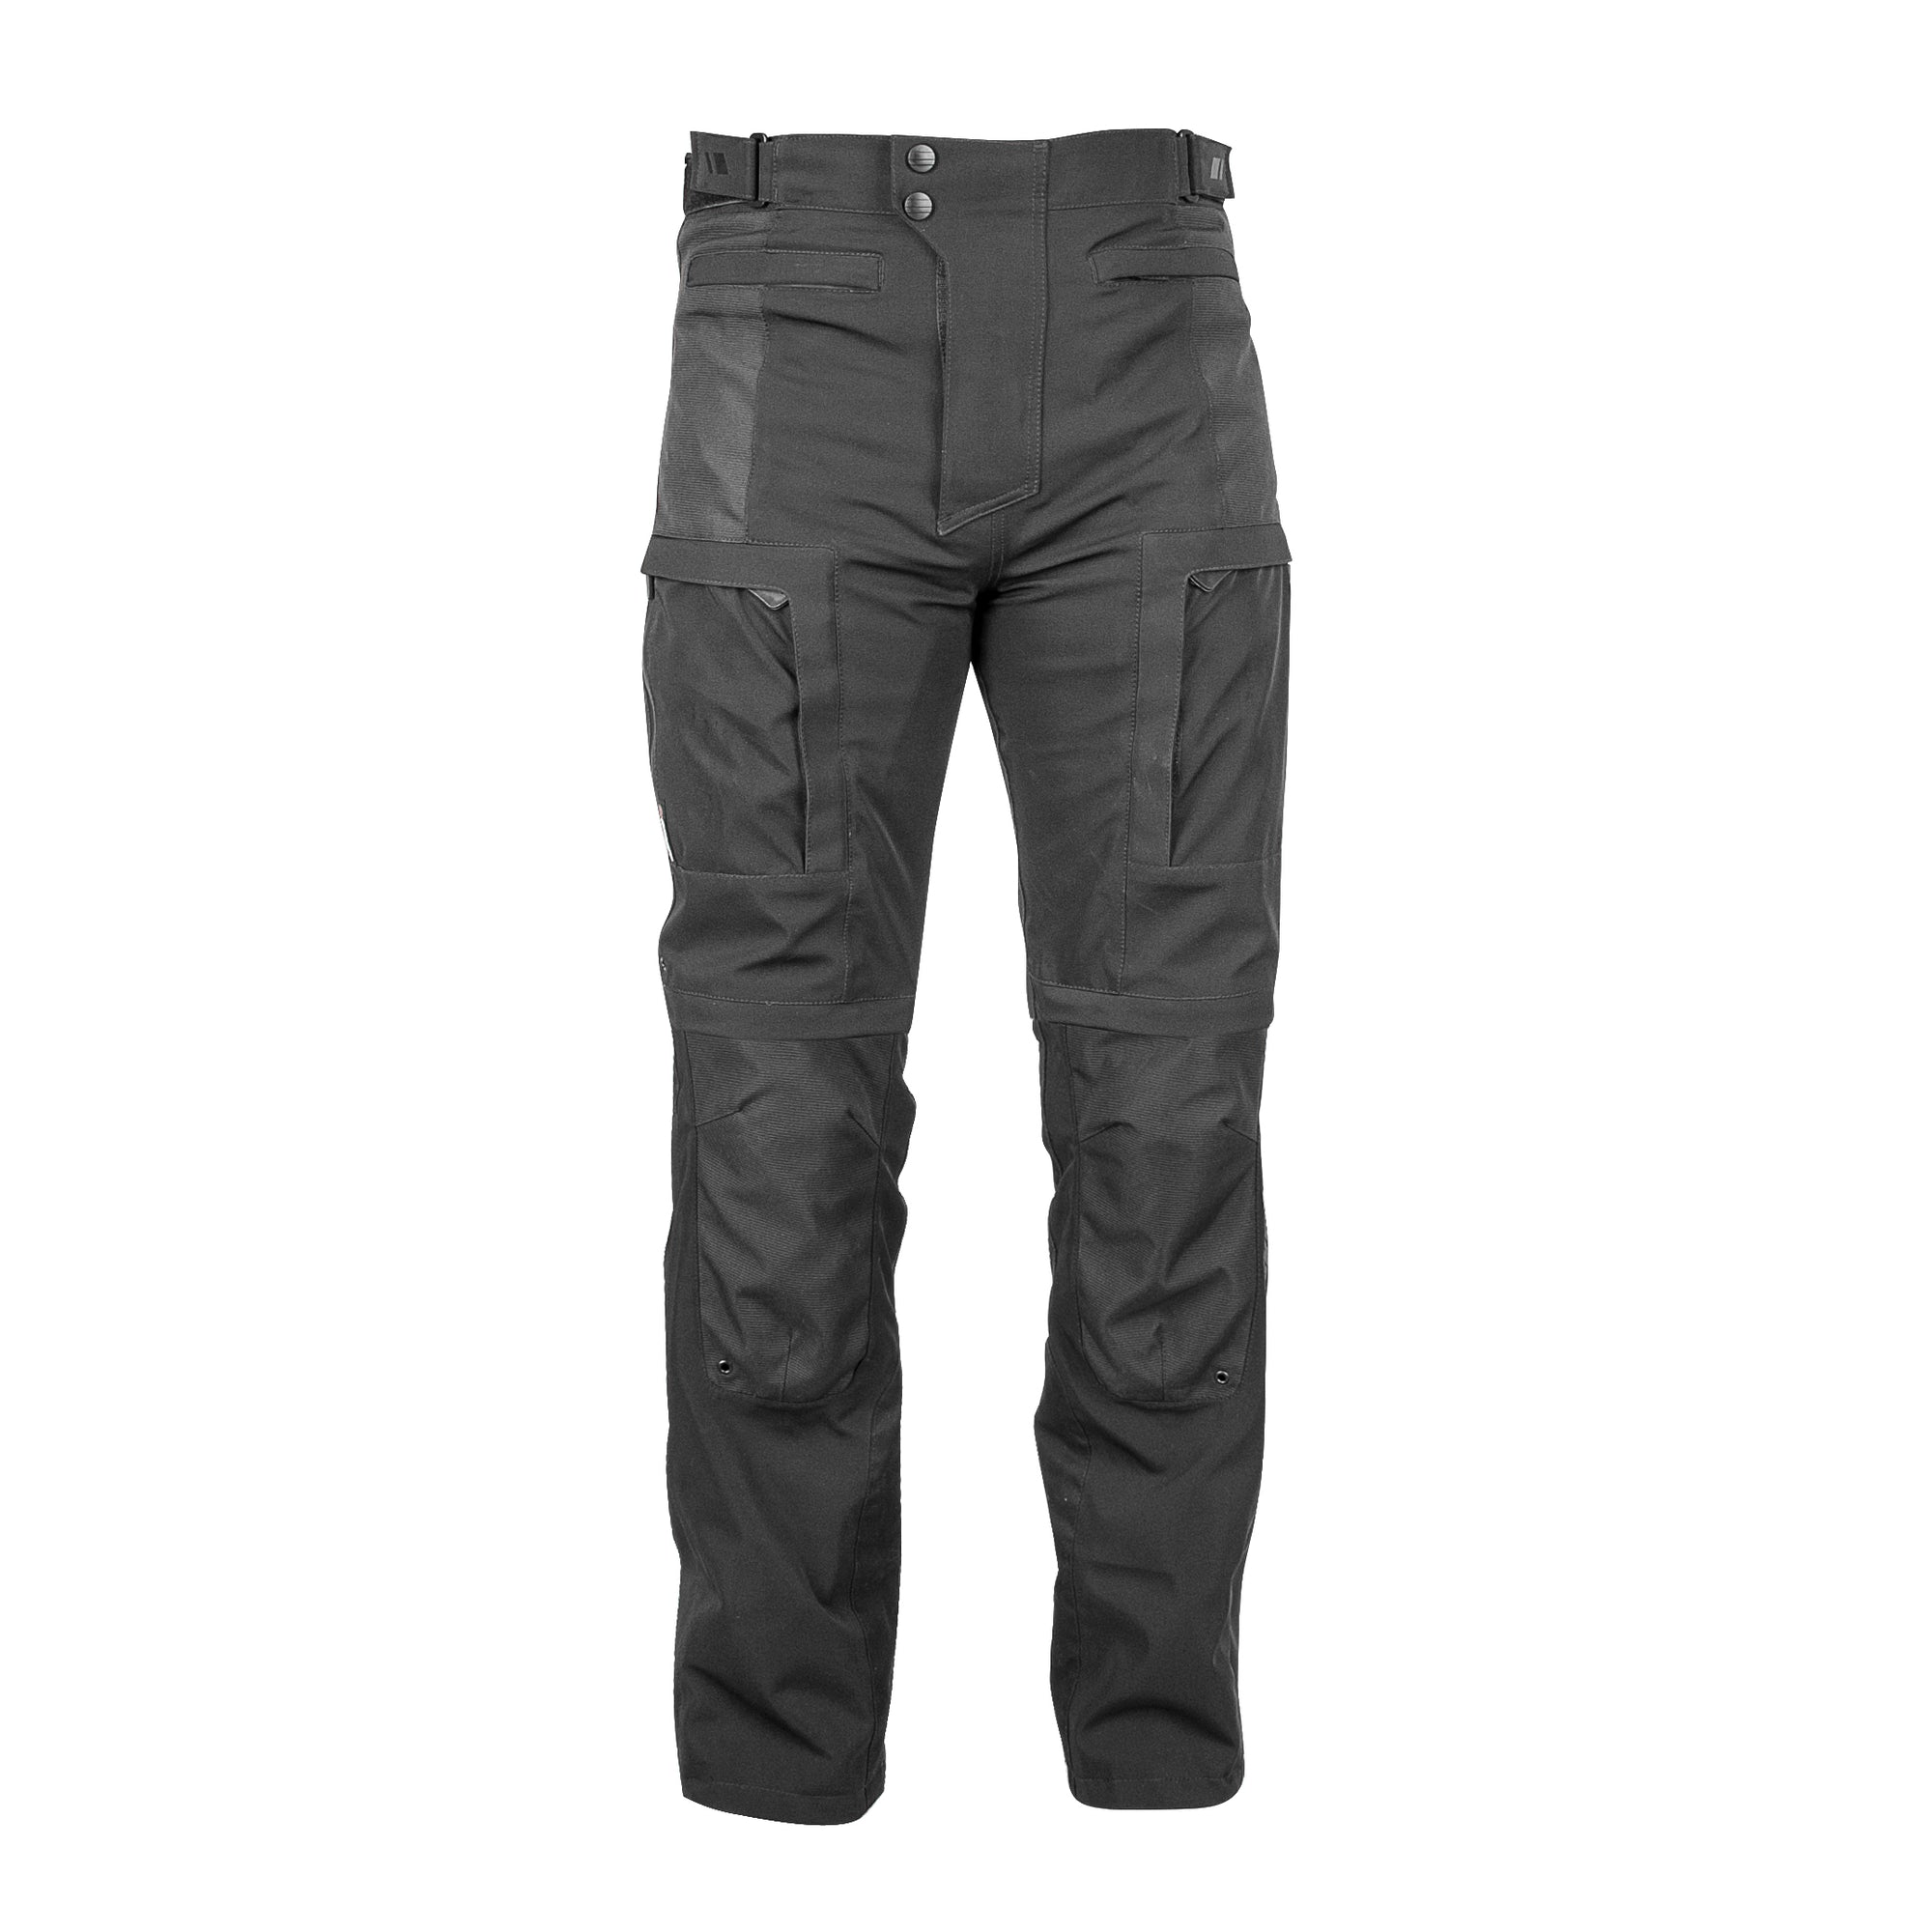 Technical Motorcycle Pants in Ixs Tallin Black Fabric For Sale Online   Outletmotoeu